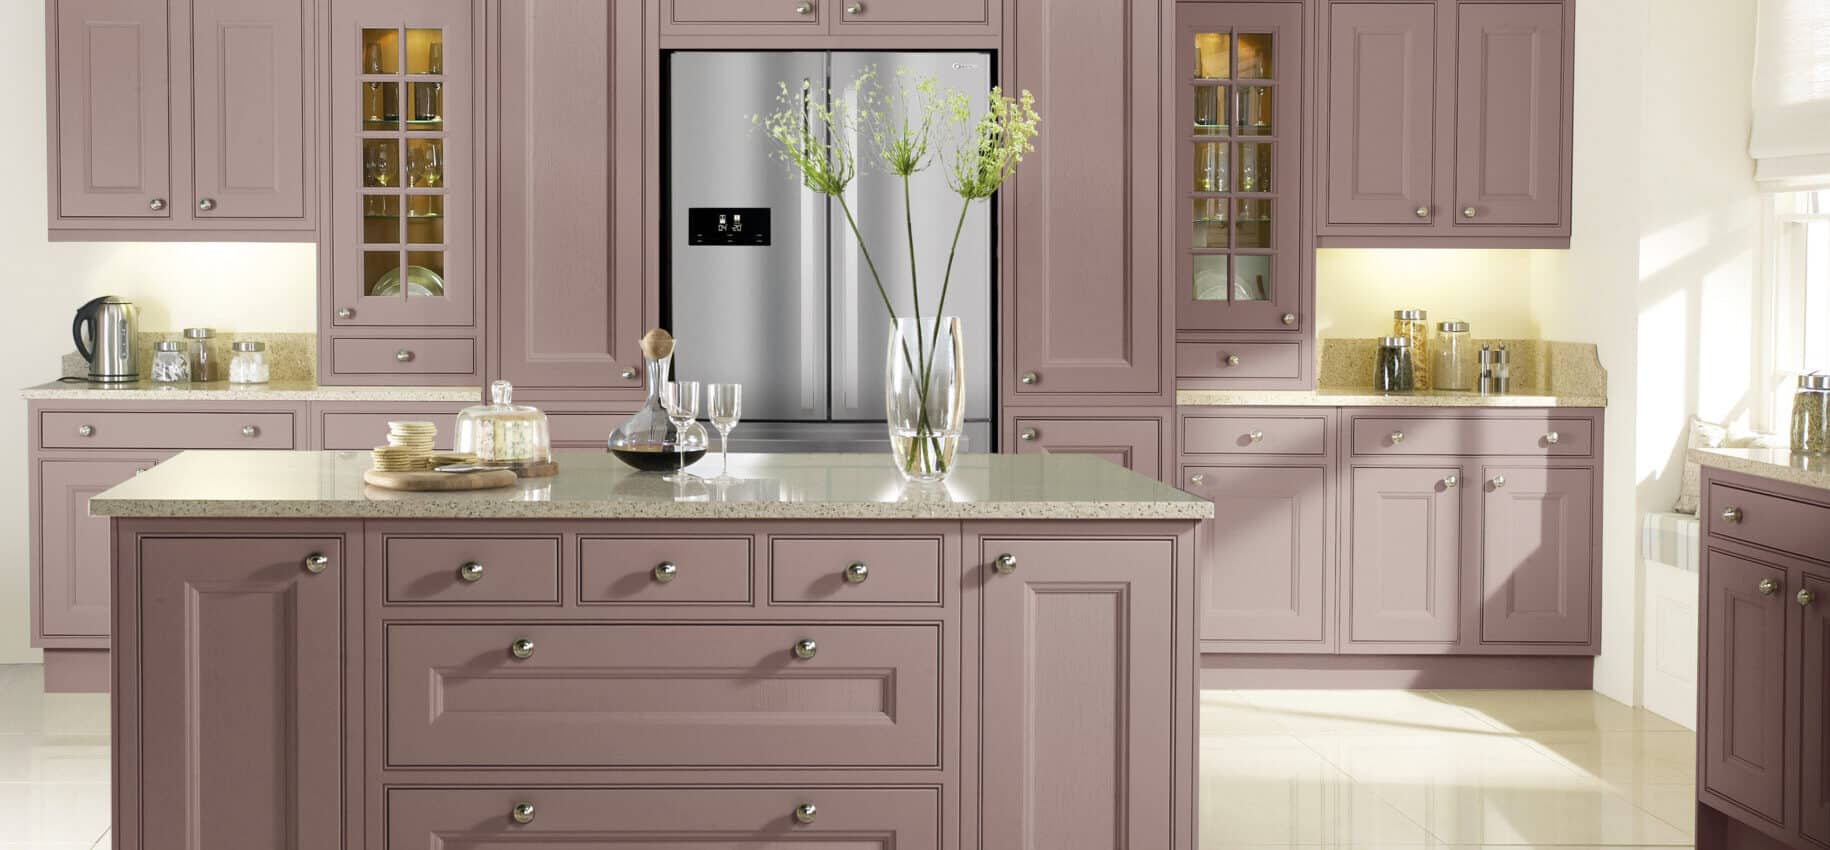 Shaker-Style In-Frame Kitchen with Beaded Panels in Dusty Rose